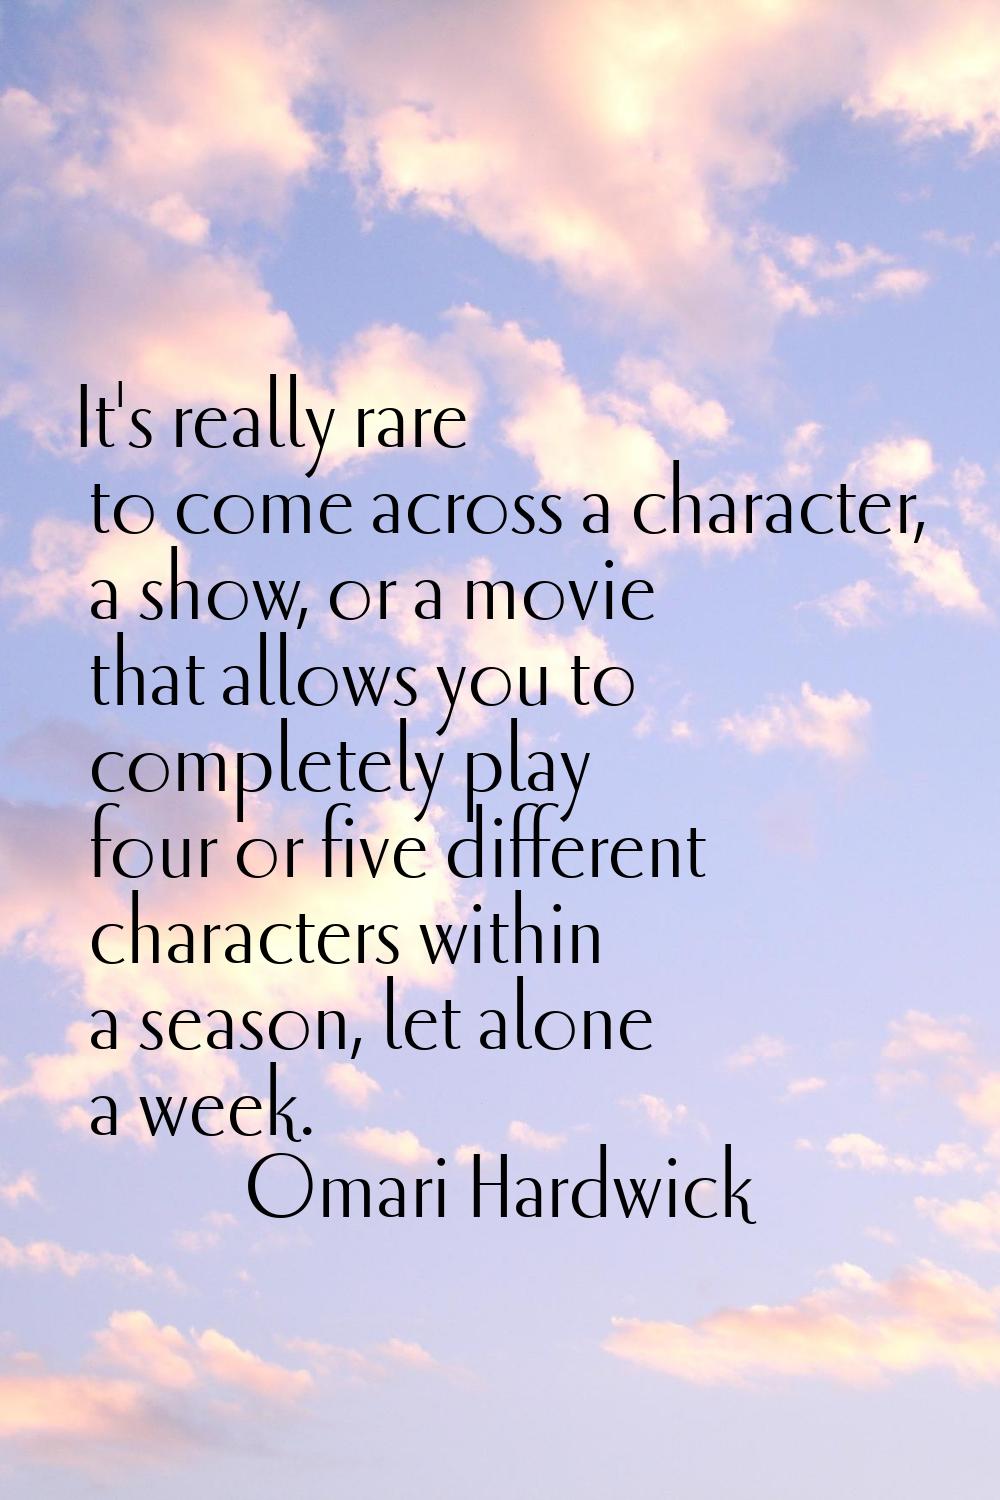 It's really rare to come across a character, a show, or a movie that allows you to completely play 